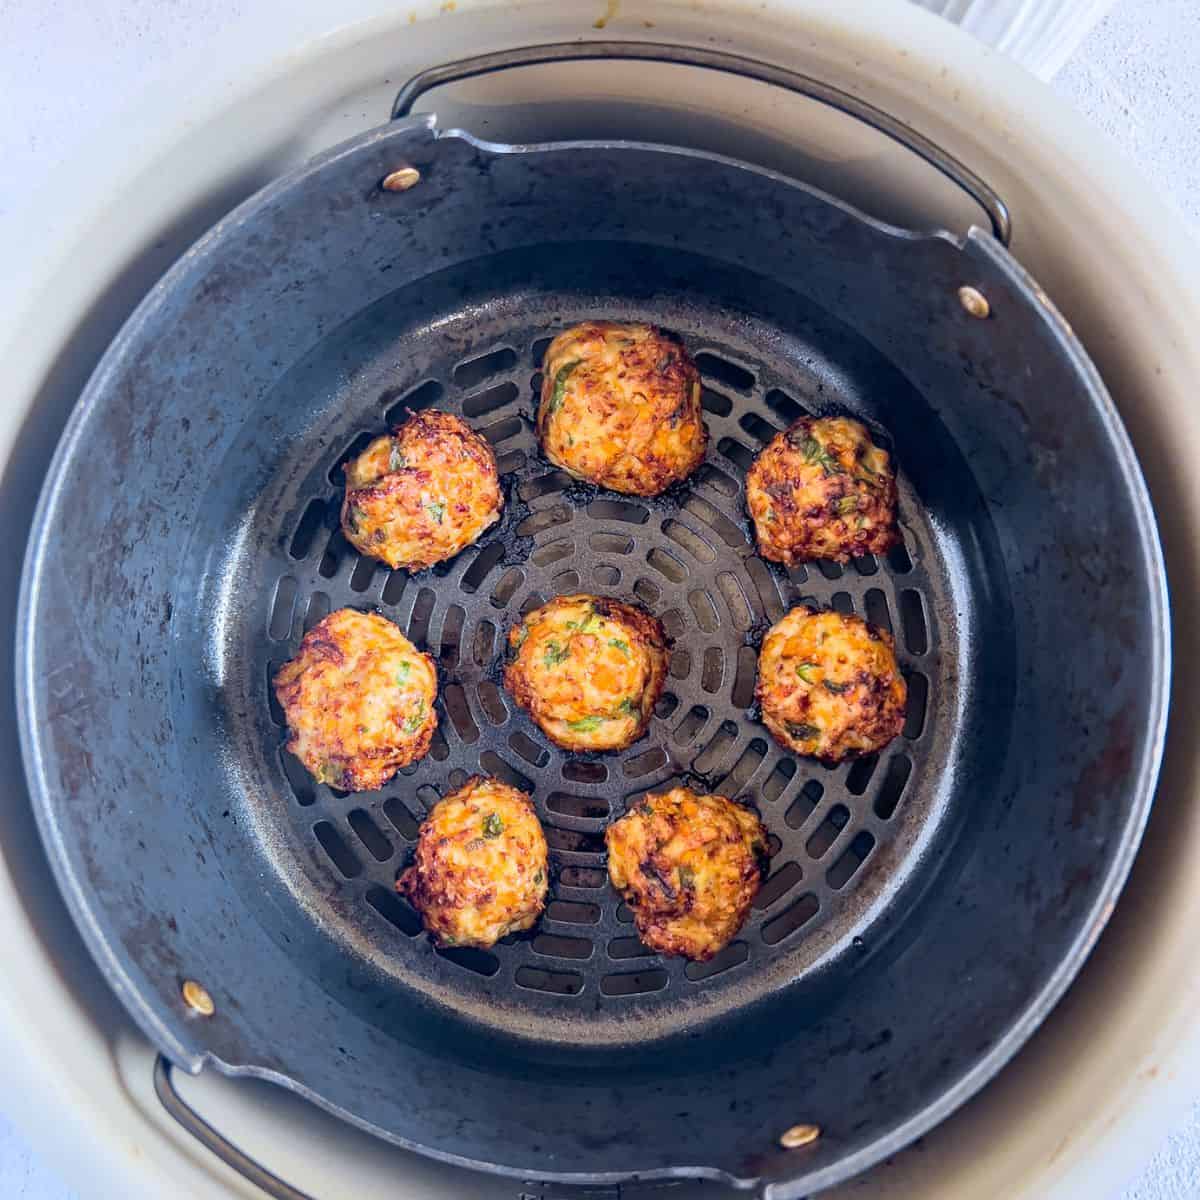 Finish dish of air-fried chicken meatballs.